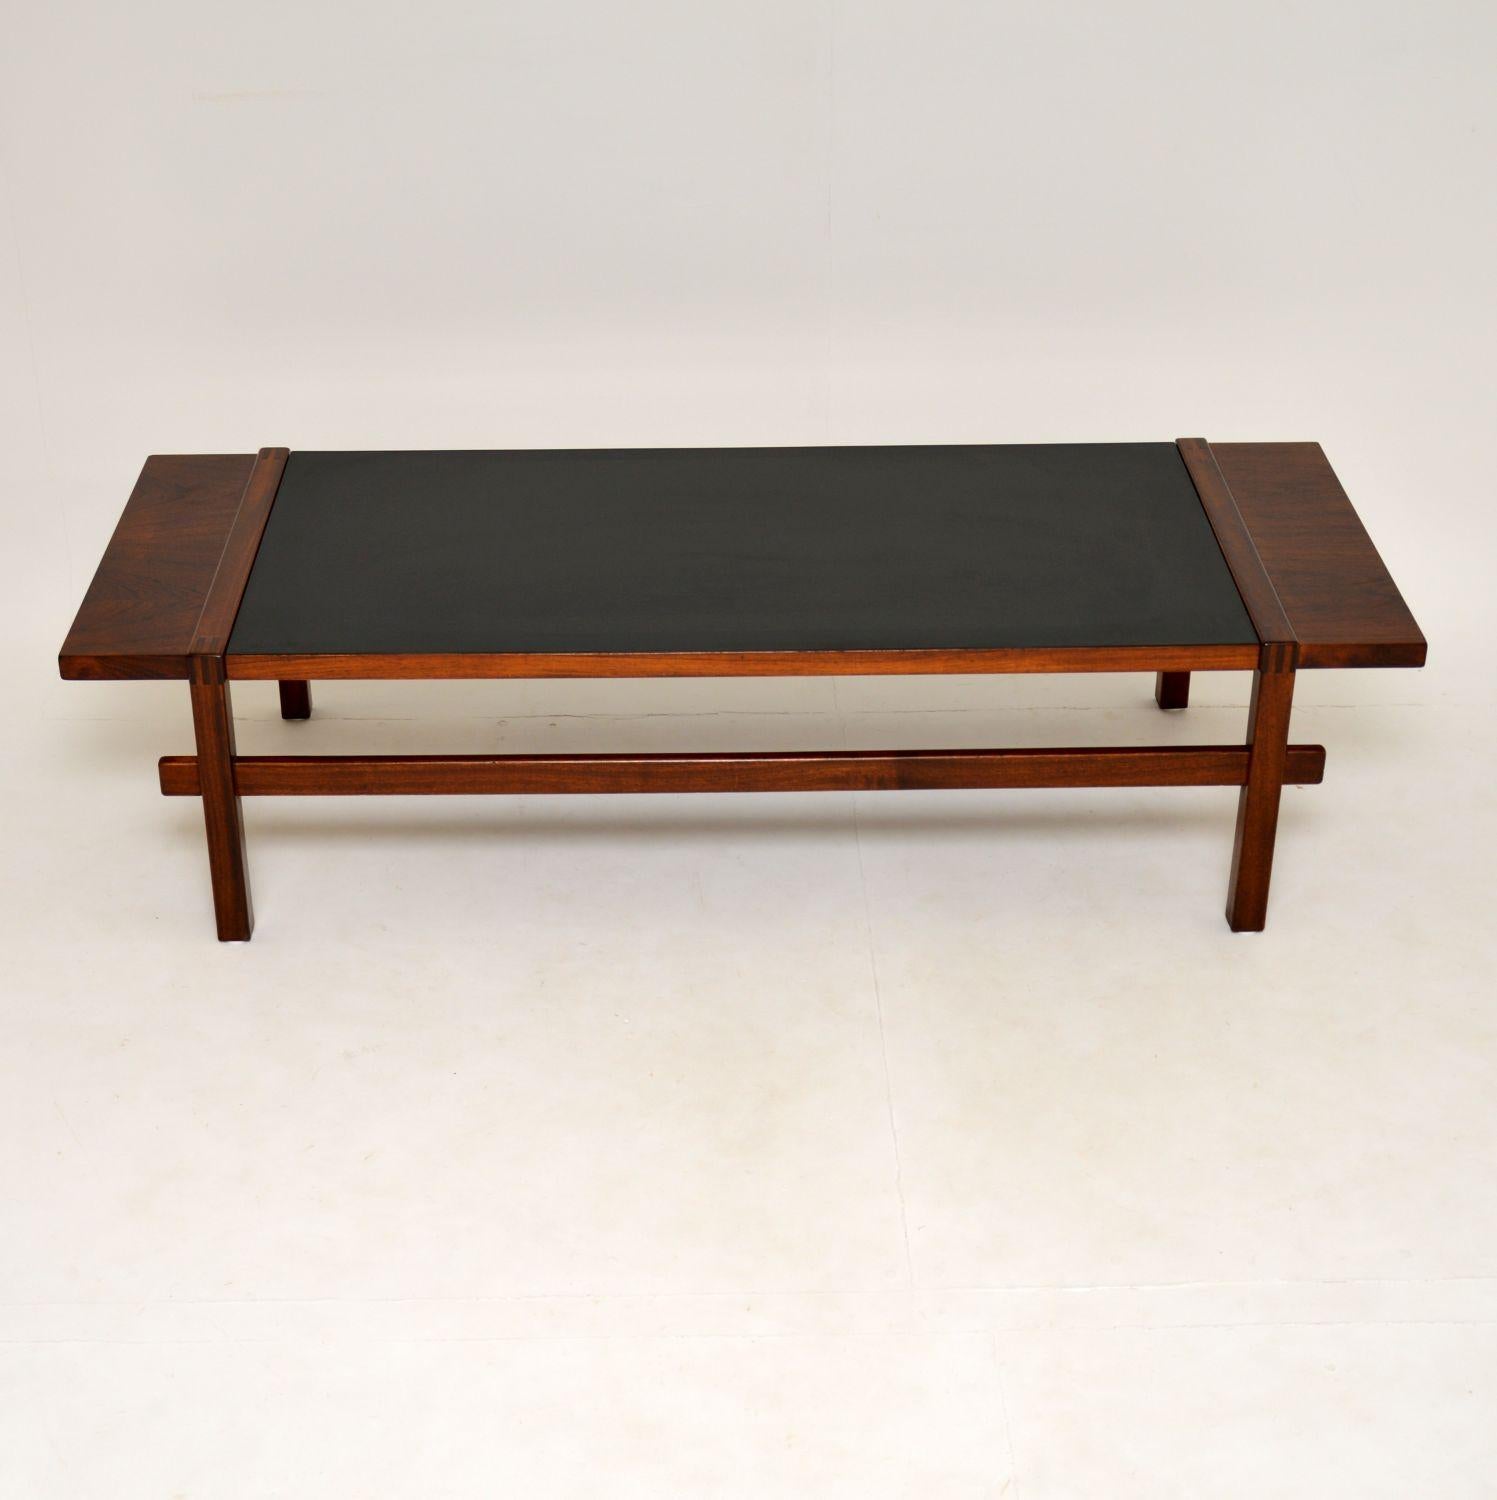 A stunning, very large and very unusual Danish coffee table. This dates from the 1960s.

It has a unique reversible mechanism that we have never seen before. The centre of the top is wood on one side and black formica on the underside. There is a